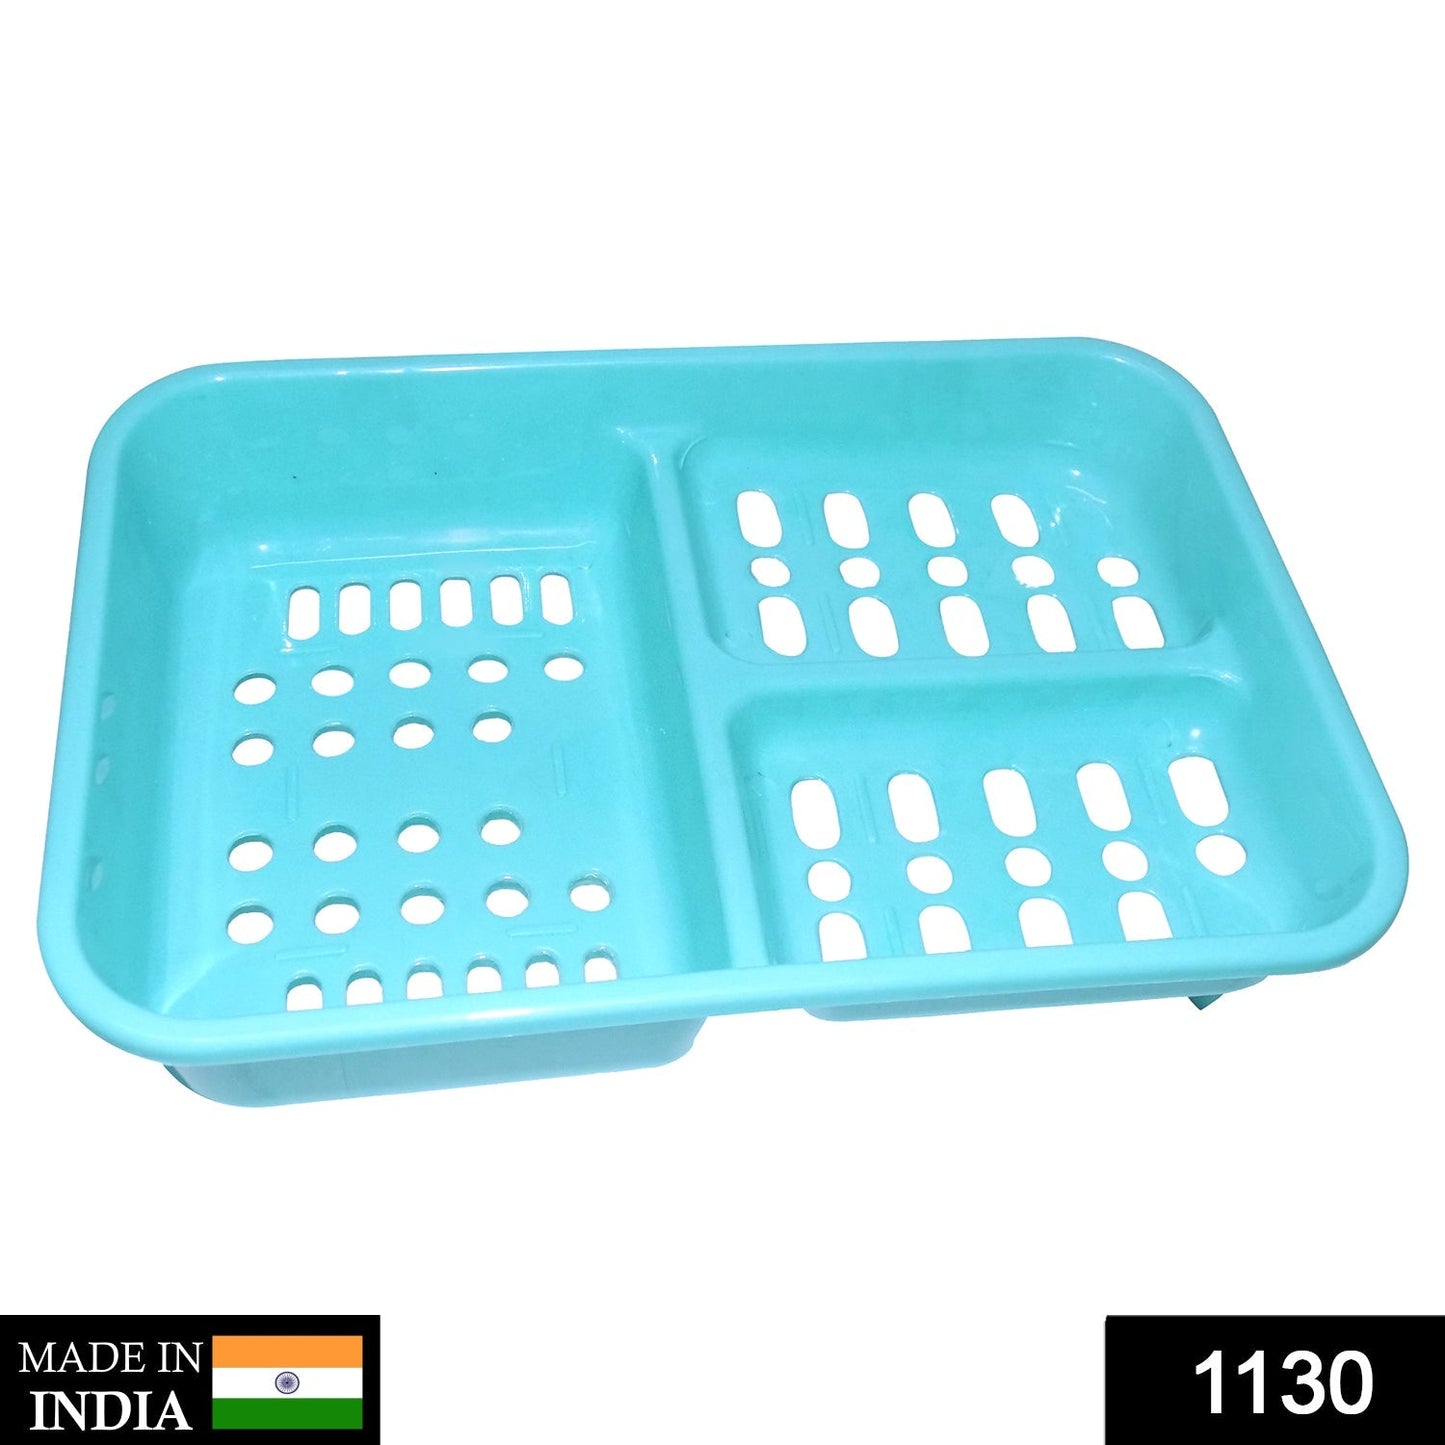 3-in-1 Soap keeping Plastic Case for Bathroom use